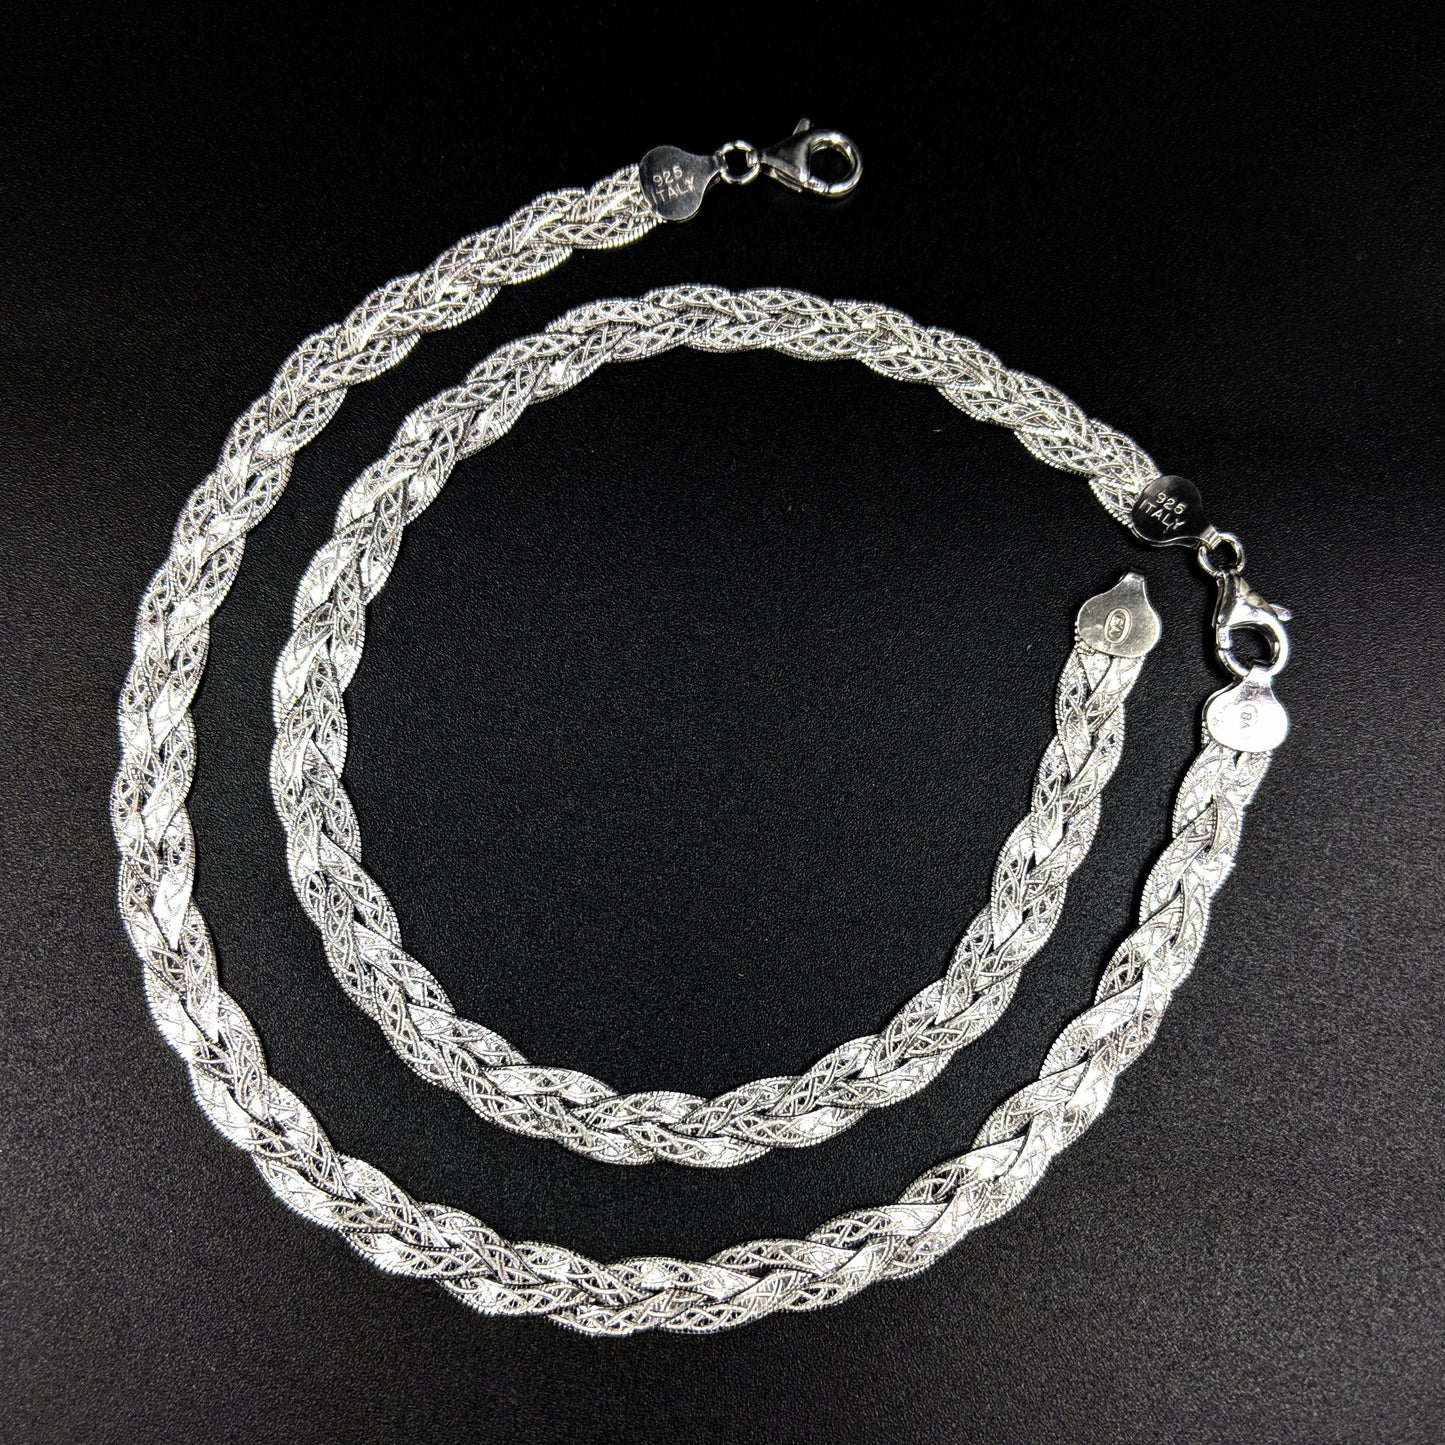 Italian Chain String Anklets